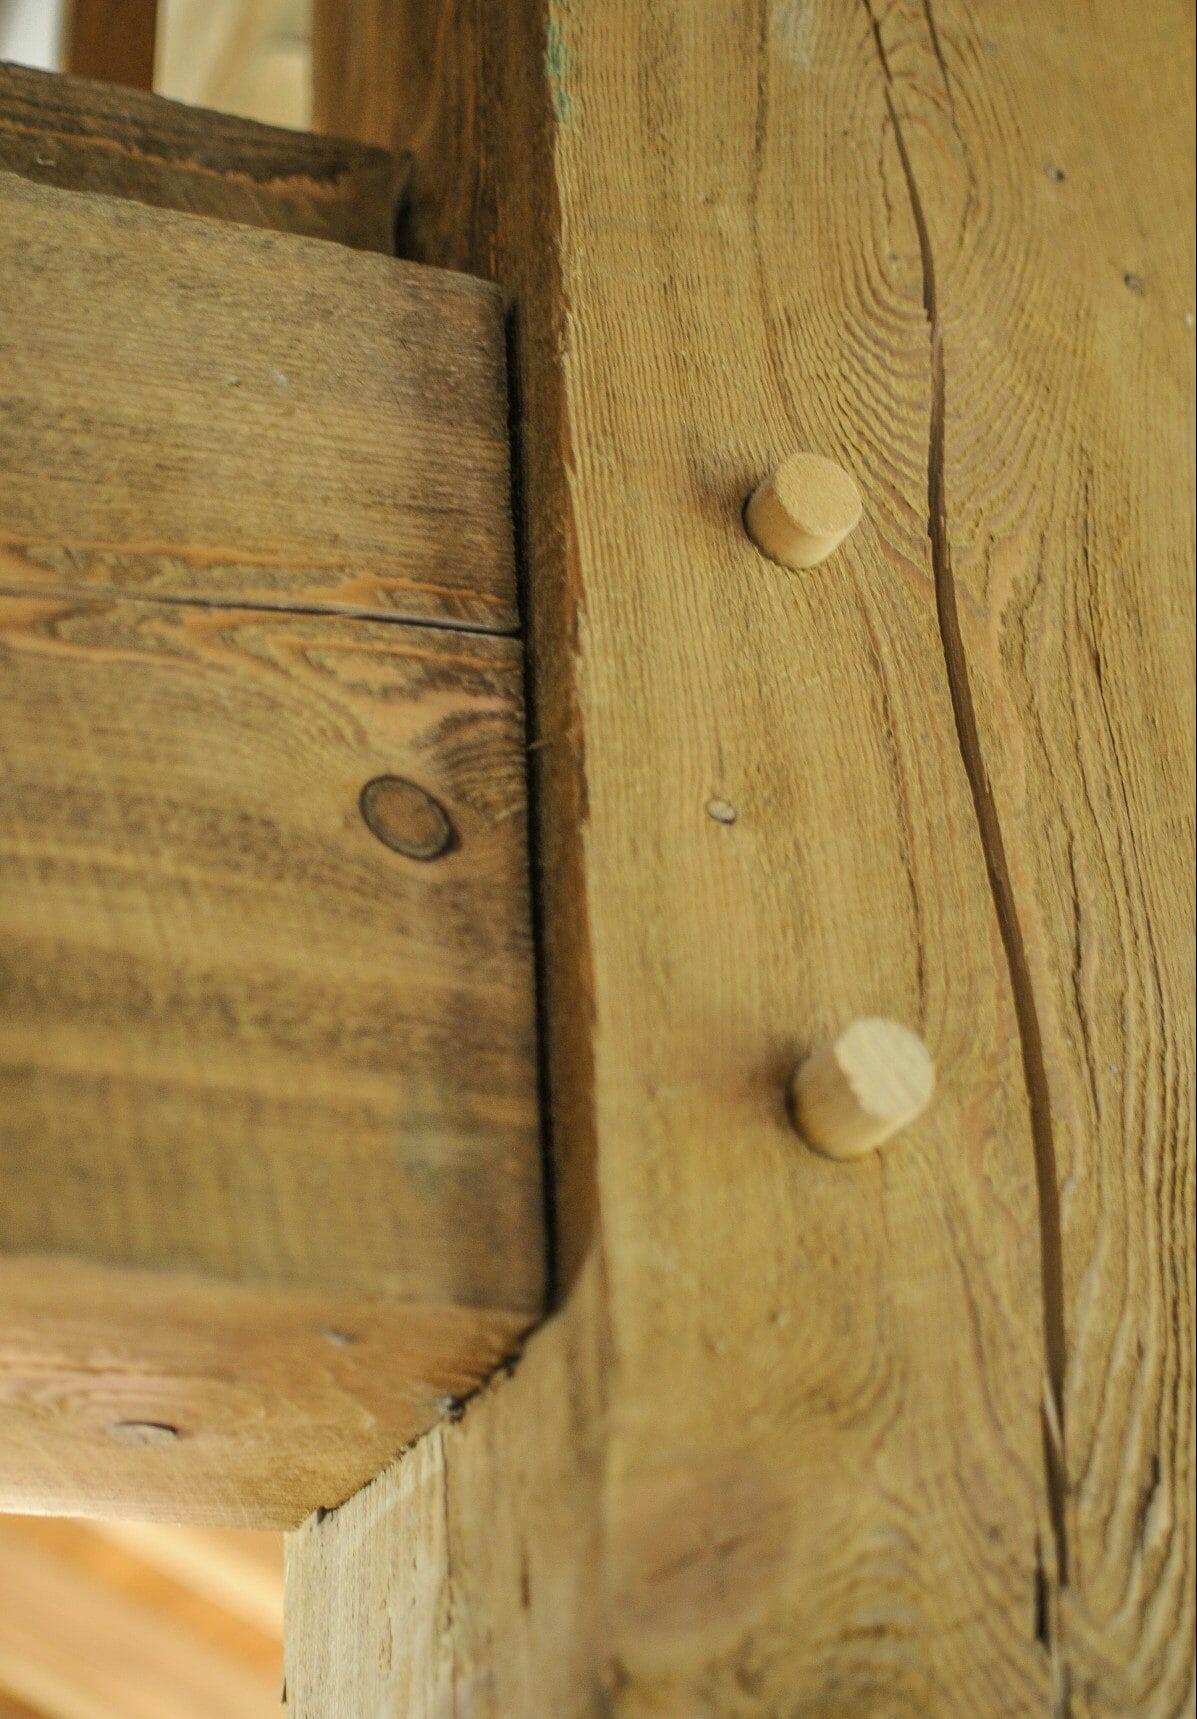 Traditional Joinery, Mortise and Tenon